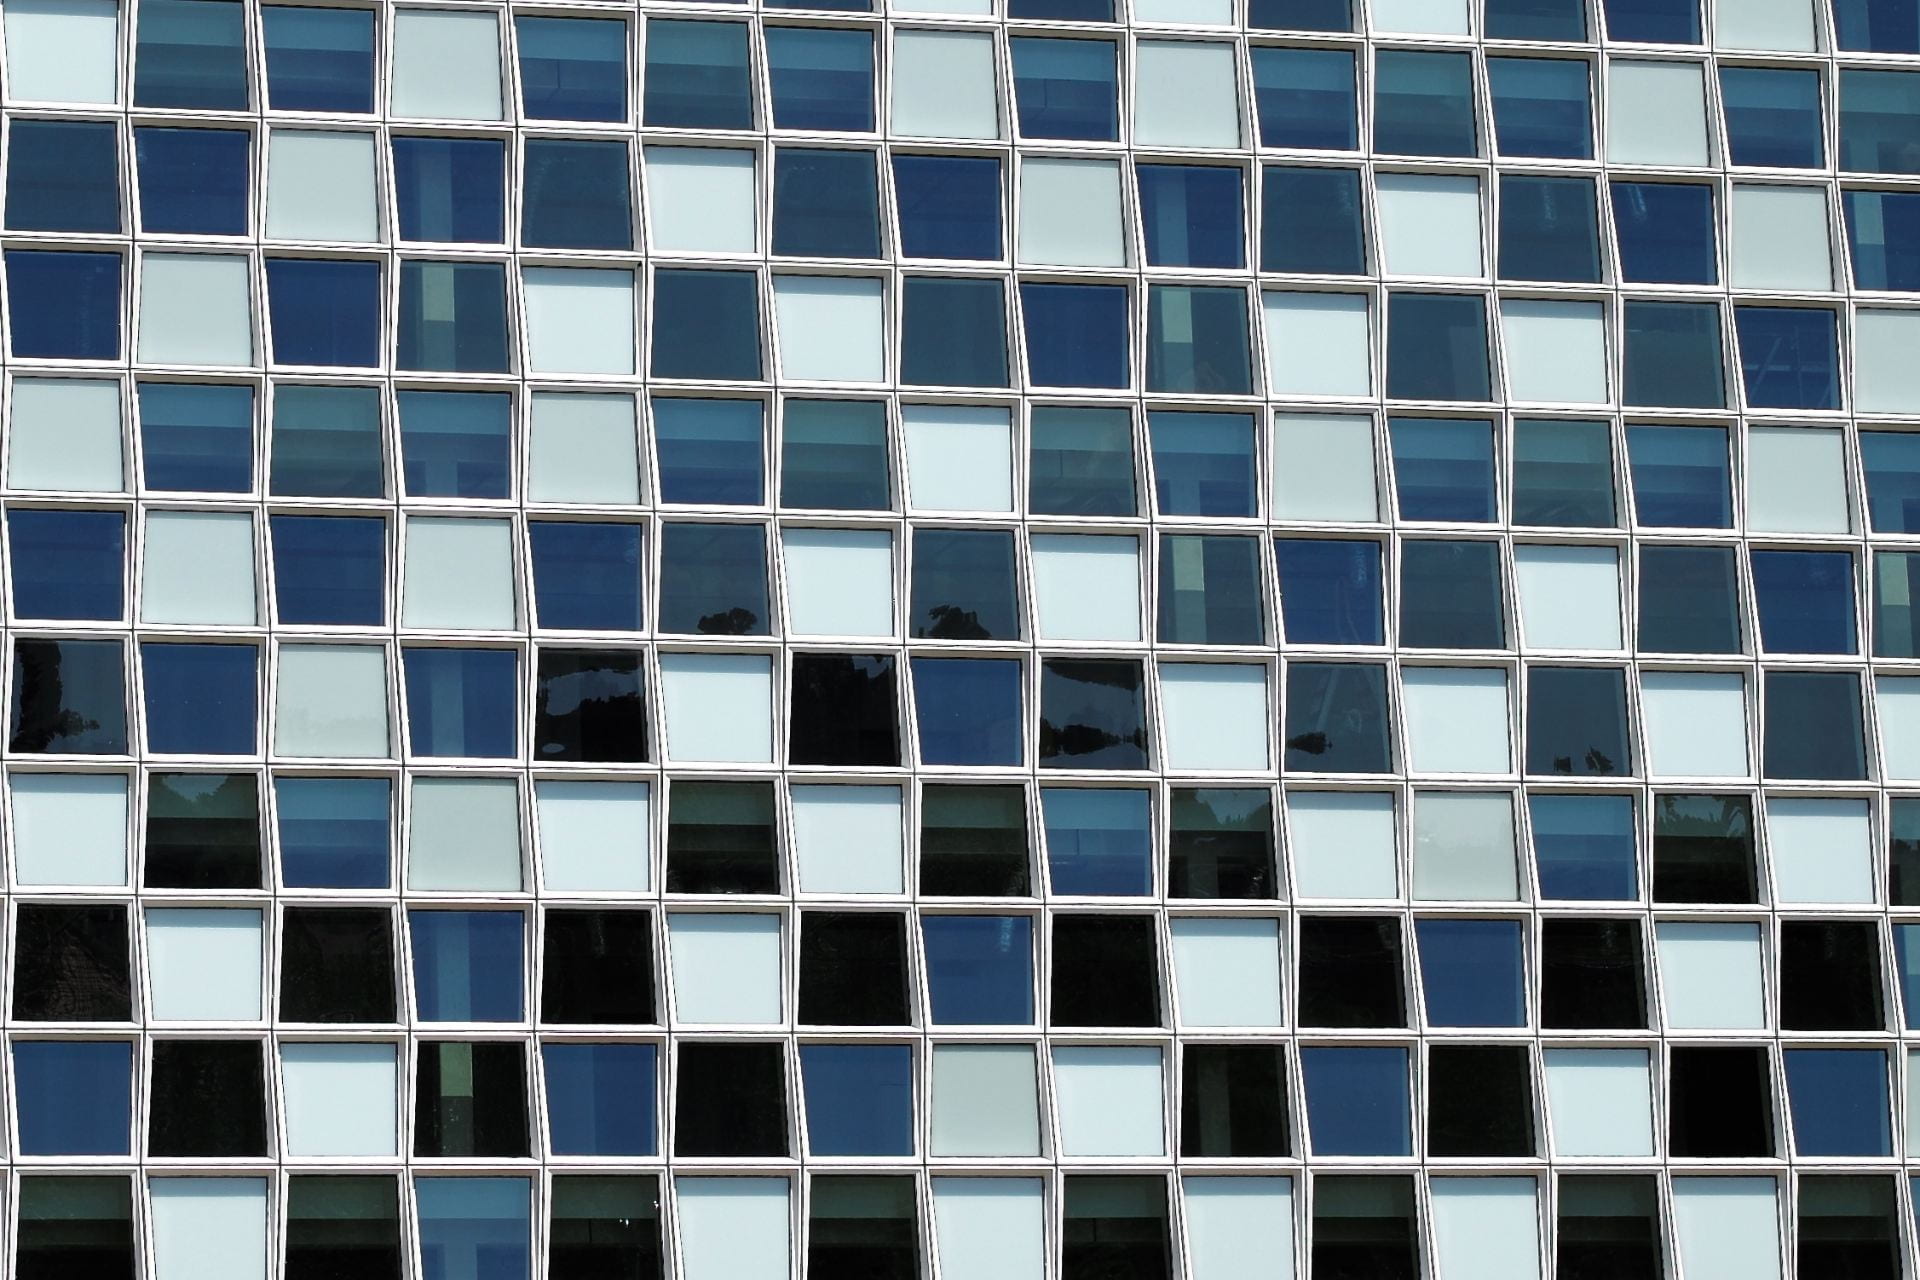 Windows of the International Criminal Court (ICC) in The Hague. Source: Roman Boed, Creative Commons